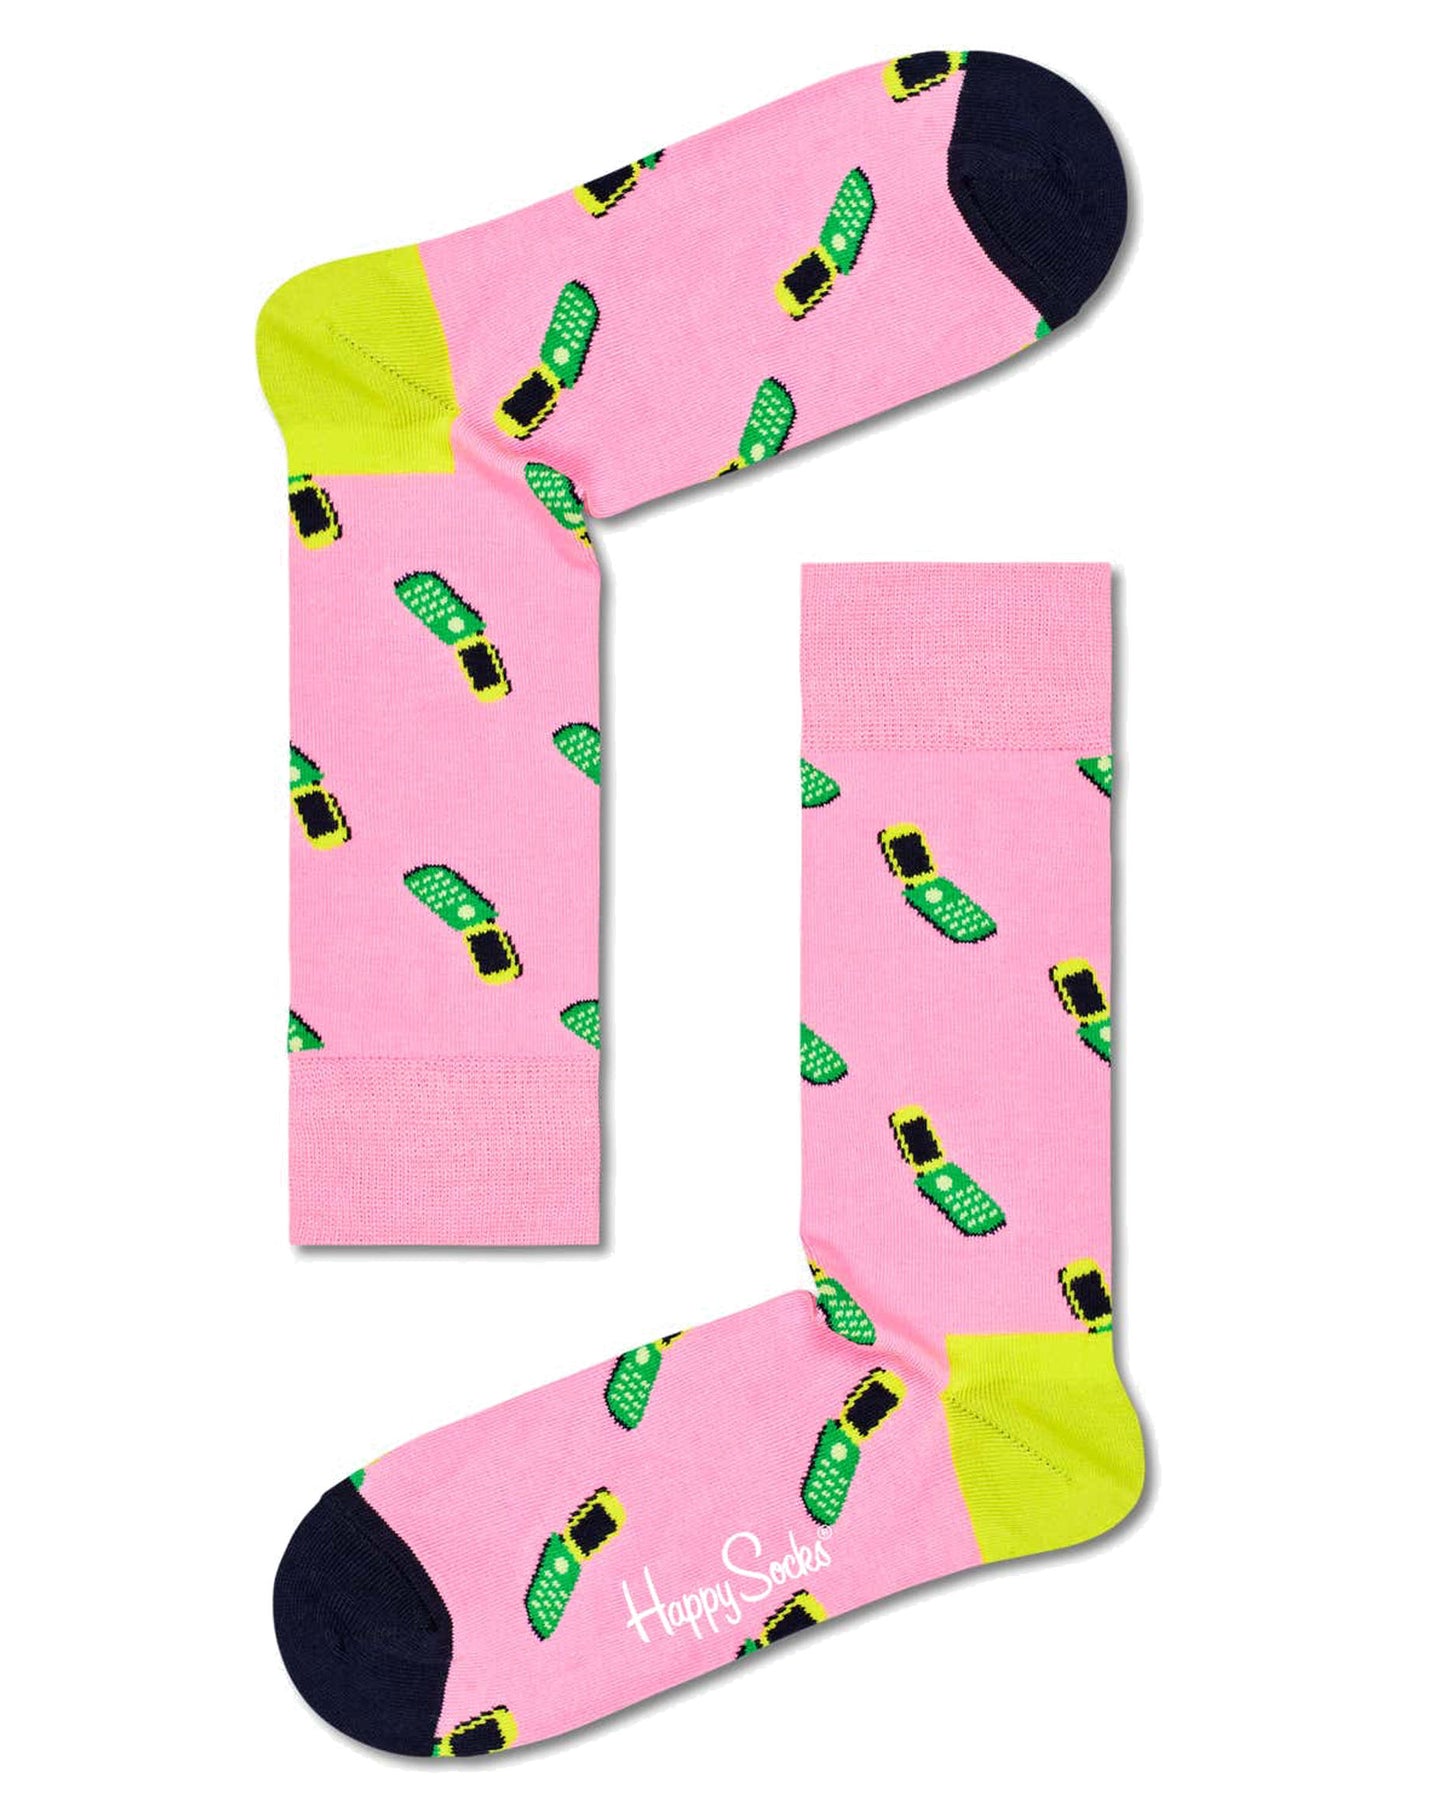 Happy Socks Call Me Maybe Sock - Light pink cotton socks with a flip phone style pattern in shades of green and black, bright lime green heel and black toe.